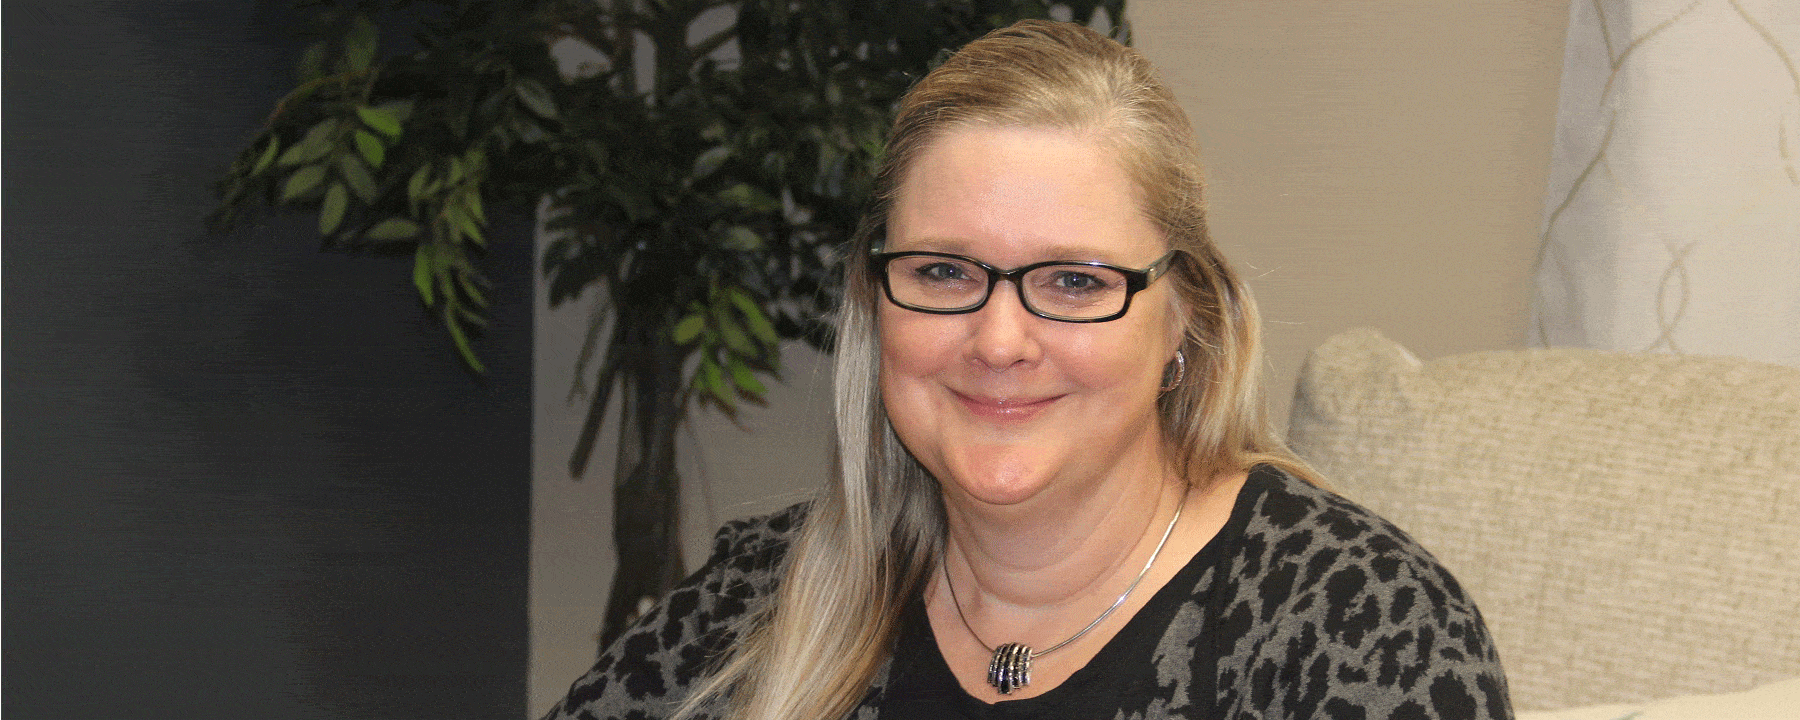 Picture of Katie Strong, a Department of Communication Sciences and Disorders faculty member